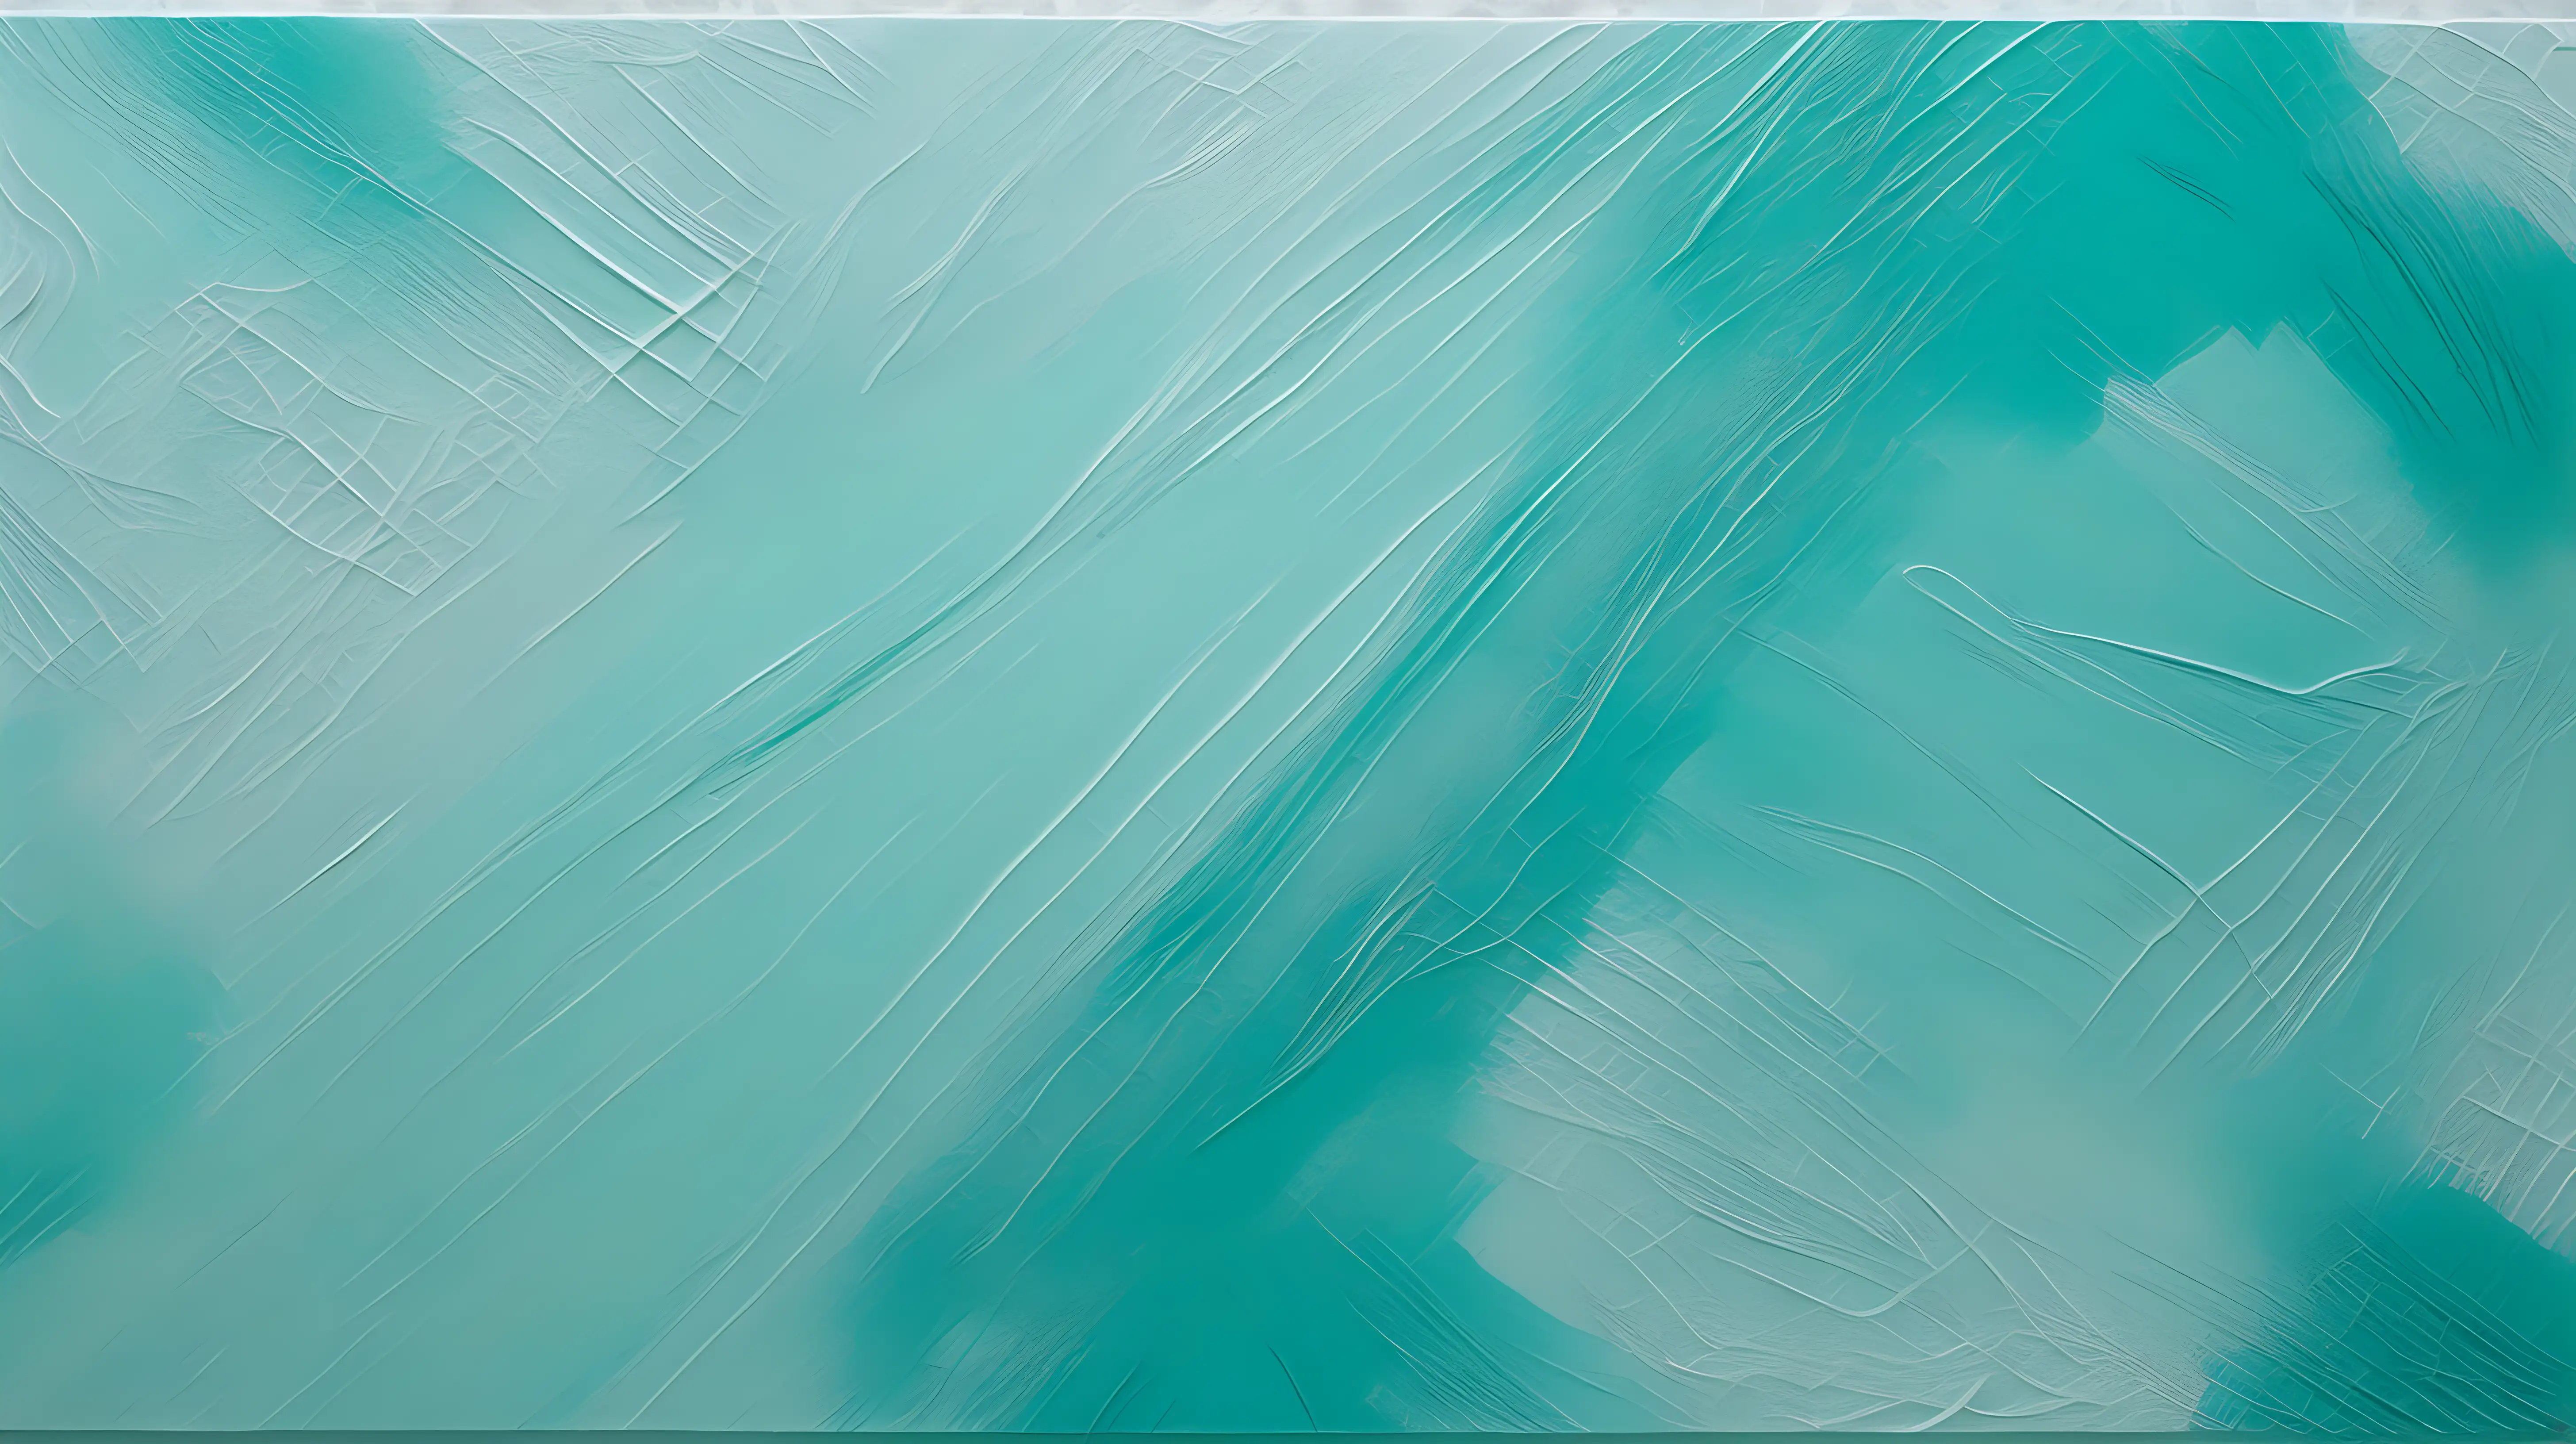 Tranquil Turquoise Seascape with Delicate Baby Blue Brushstrokes